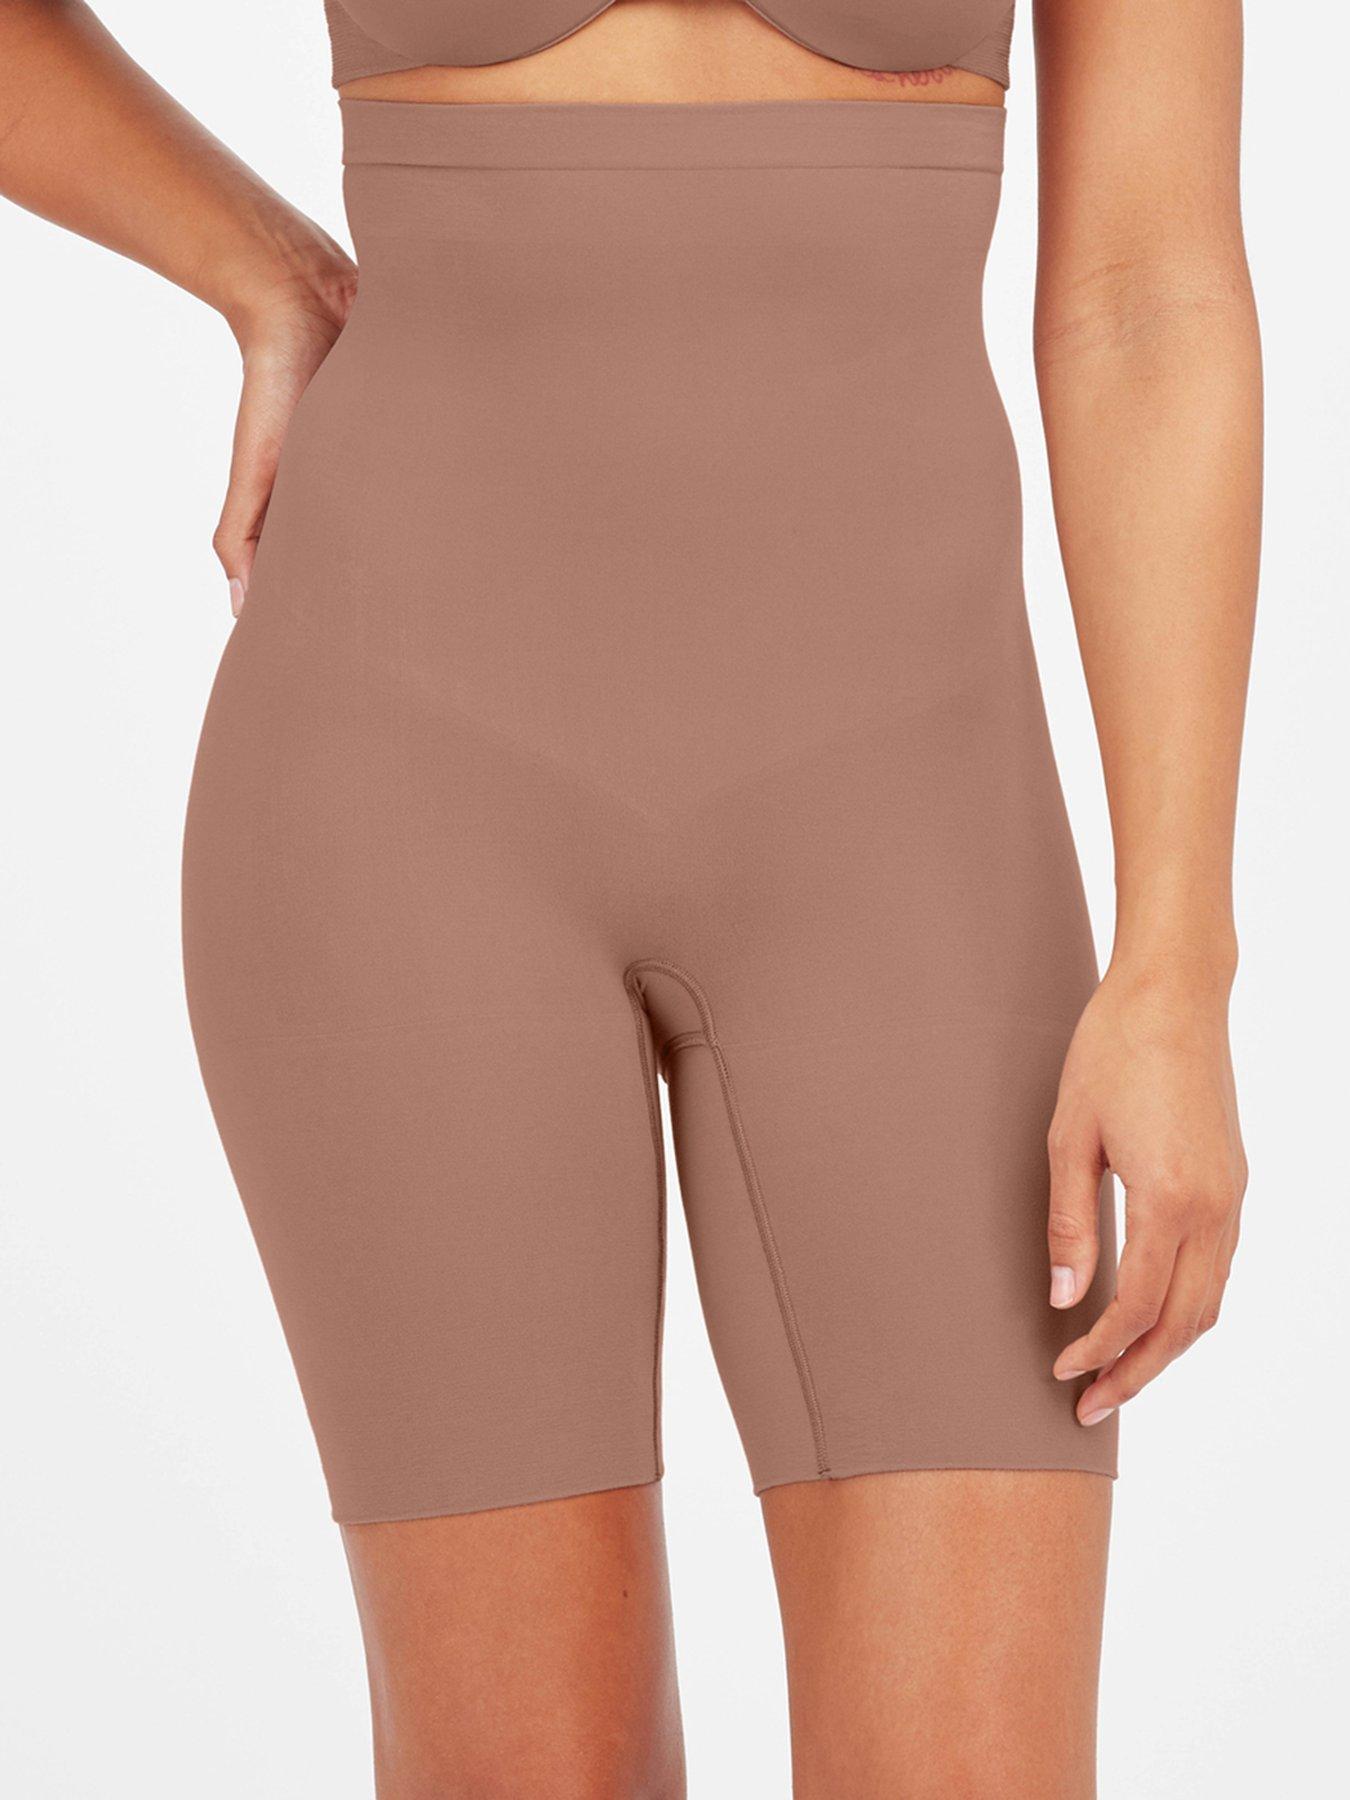 SPANX Assets UK 20 - 22 Nude Stretch Smoothing Sculpt control